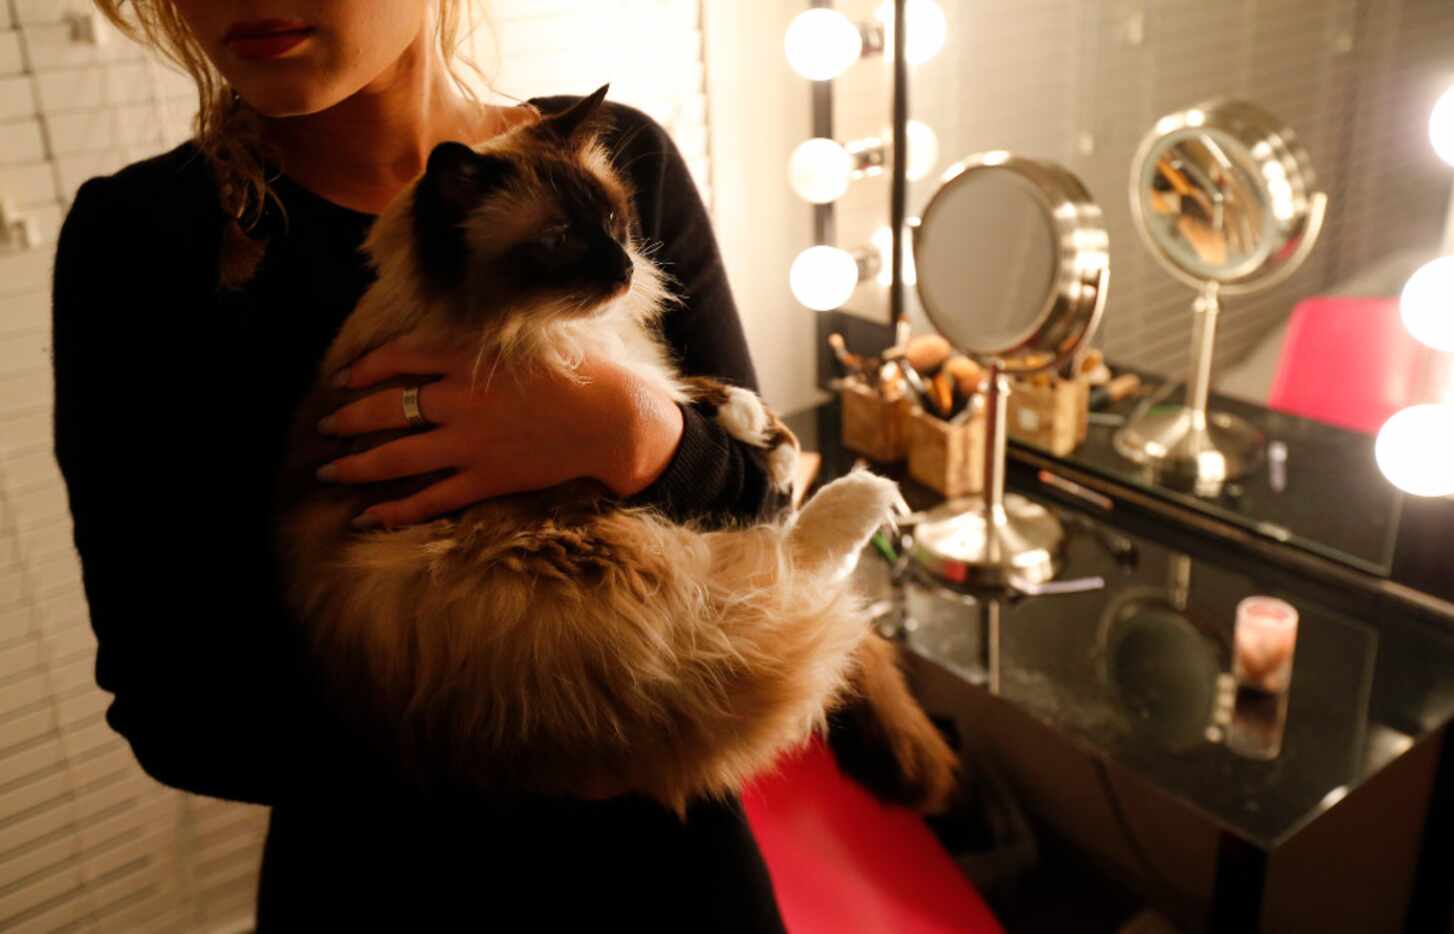 The victim was photographed with her cat in 2017 while her Title IX complaint against...